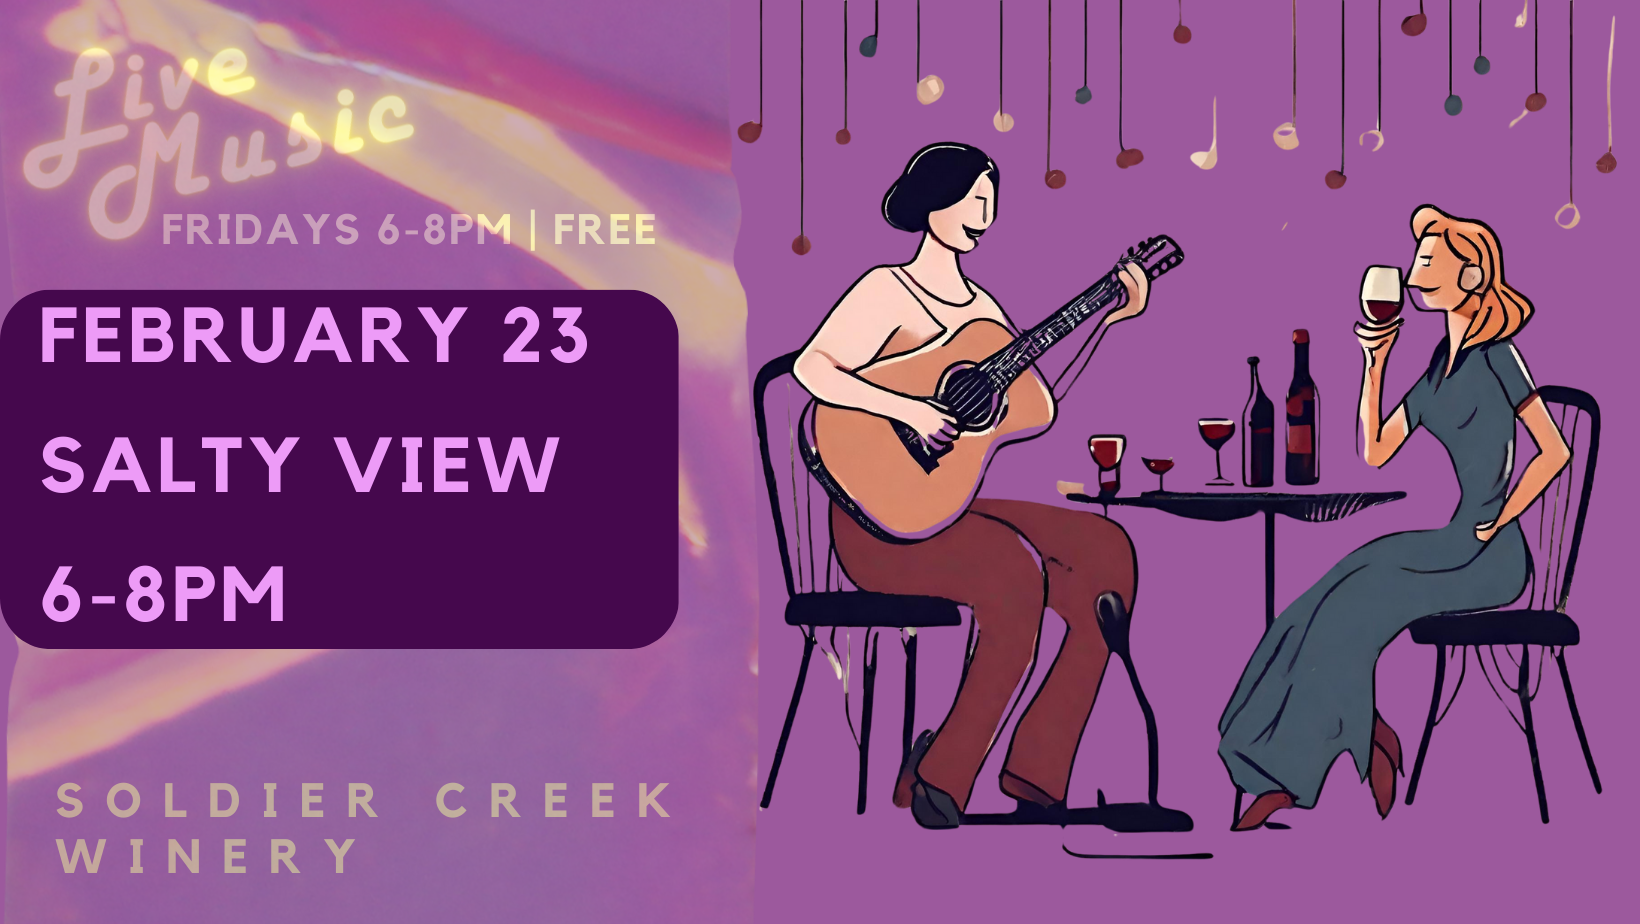 free, live music every friday at soldier creek winery. february 23 is salty view from 6-8pm. free to listen.